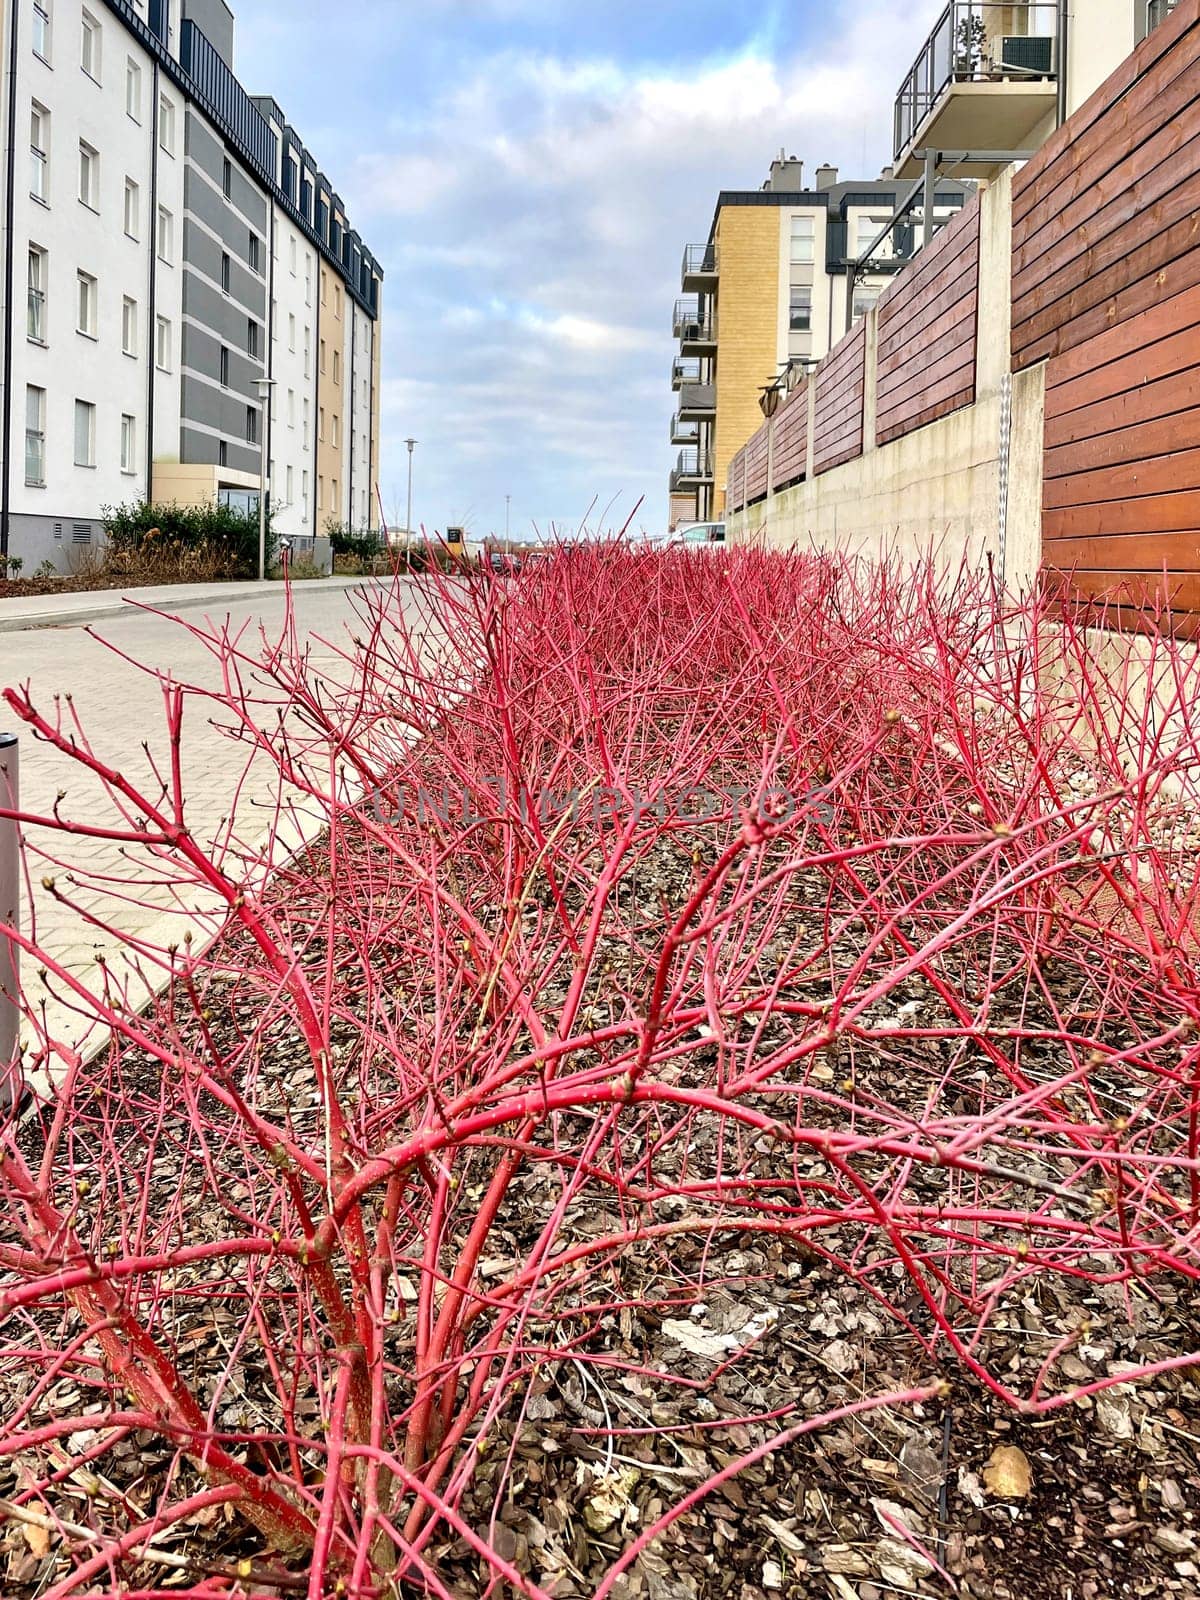 Young red shoots of a decorative plant grow in the flowerbed near the high-rise buildings. High quality photo